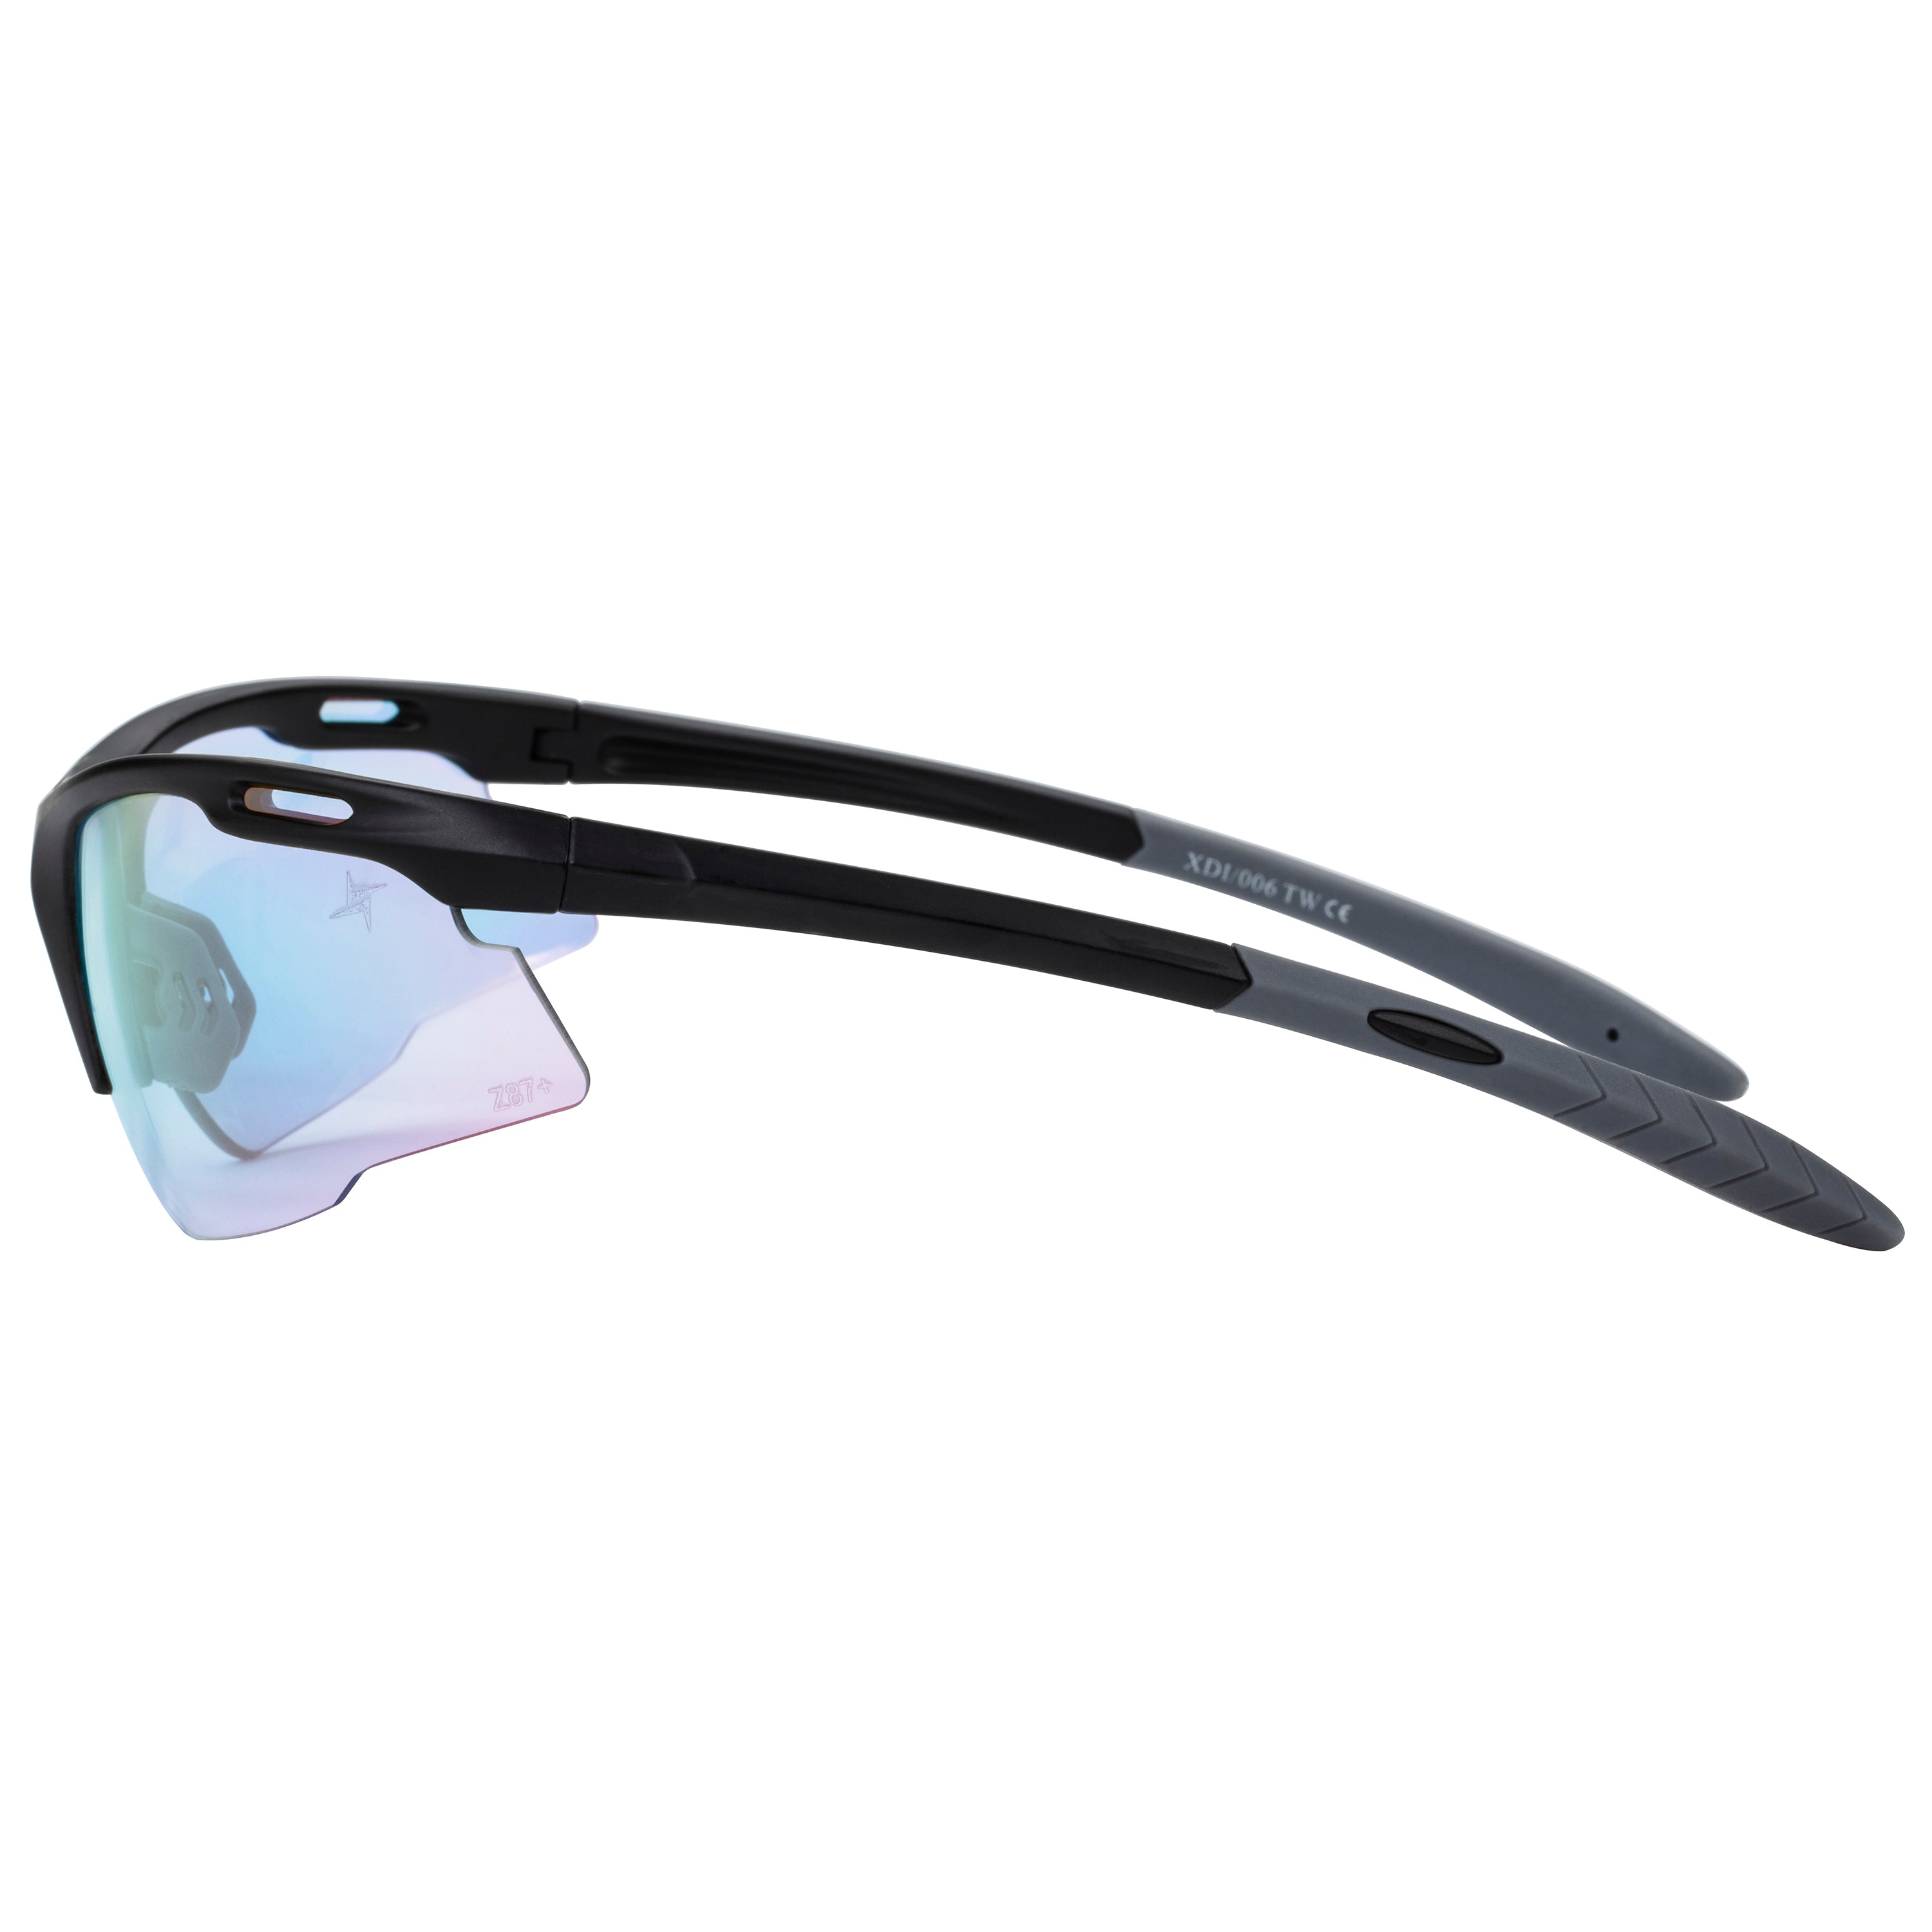 Clear to Grey Photochromic Lens with Blue Mirror Coating Half Frame Wrap Around Sport Safety Sunglasses.